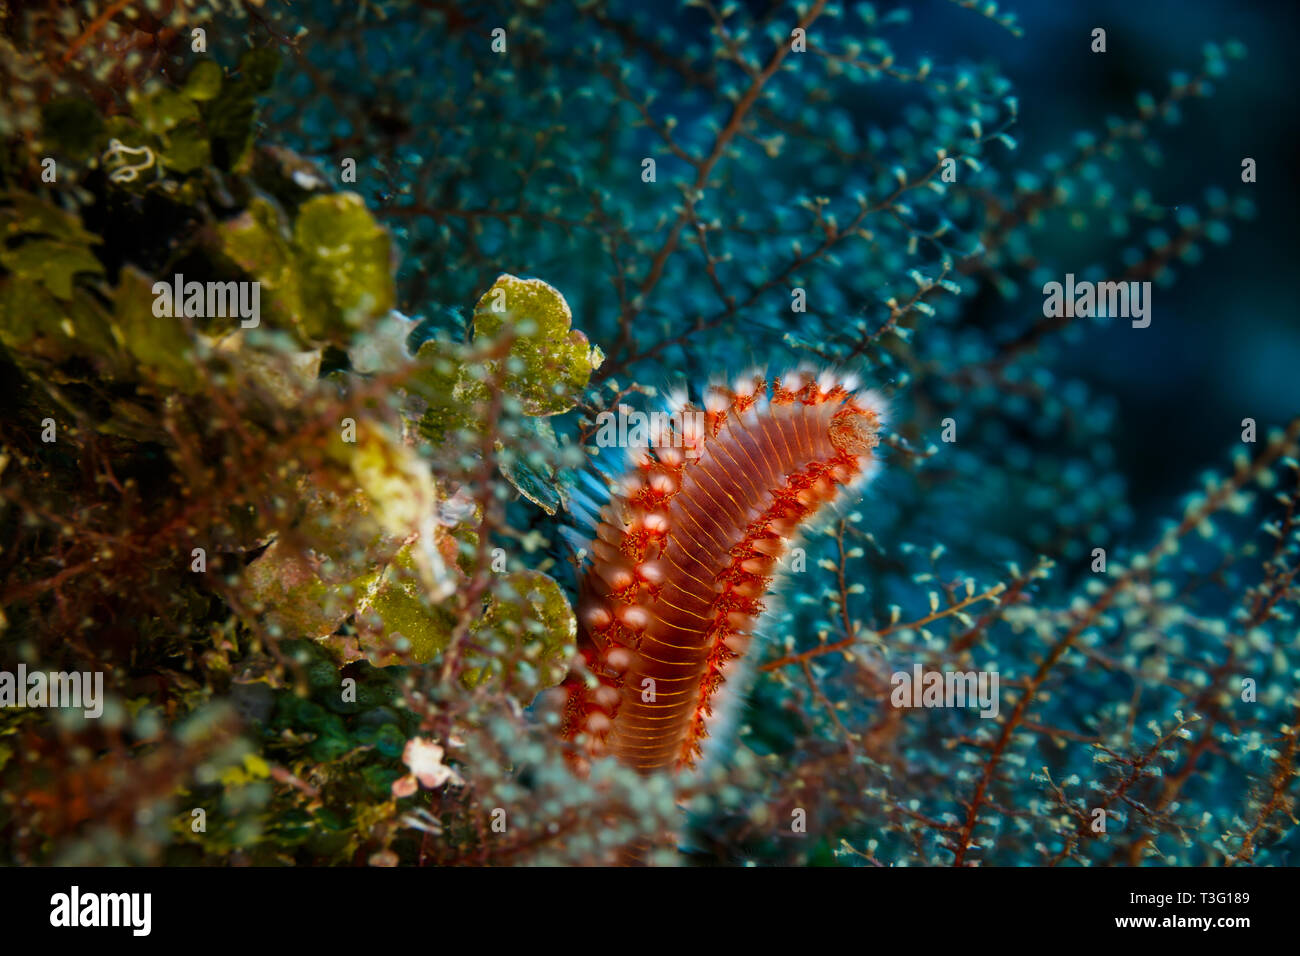 bearded Fire Worm,Hermodice carunculata , hides in tentacles of branching coral Stock Photo